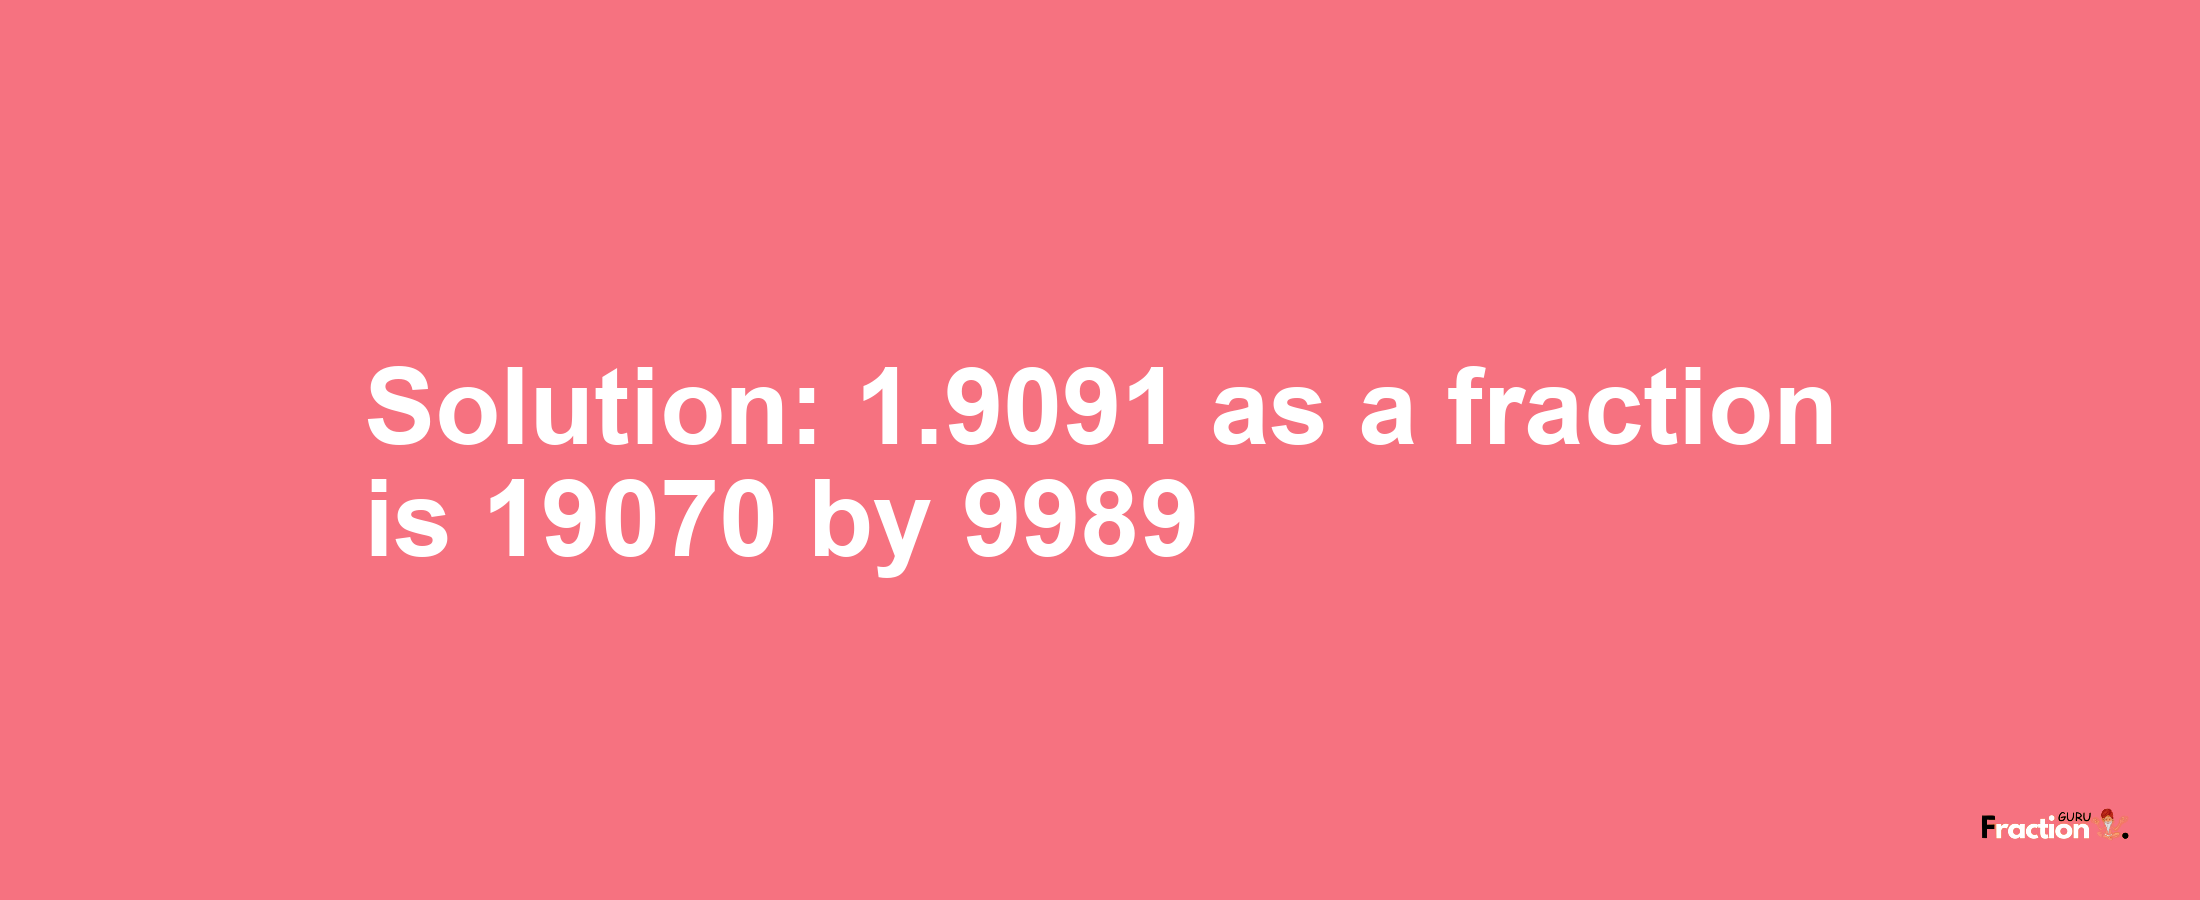 Solution:1.9091 as a fraction is 19070/9989